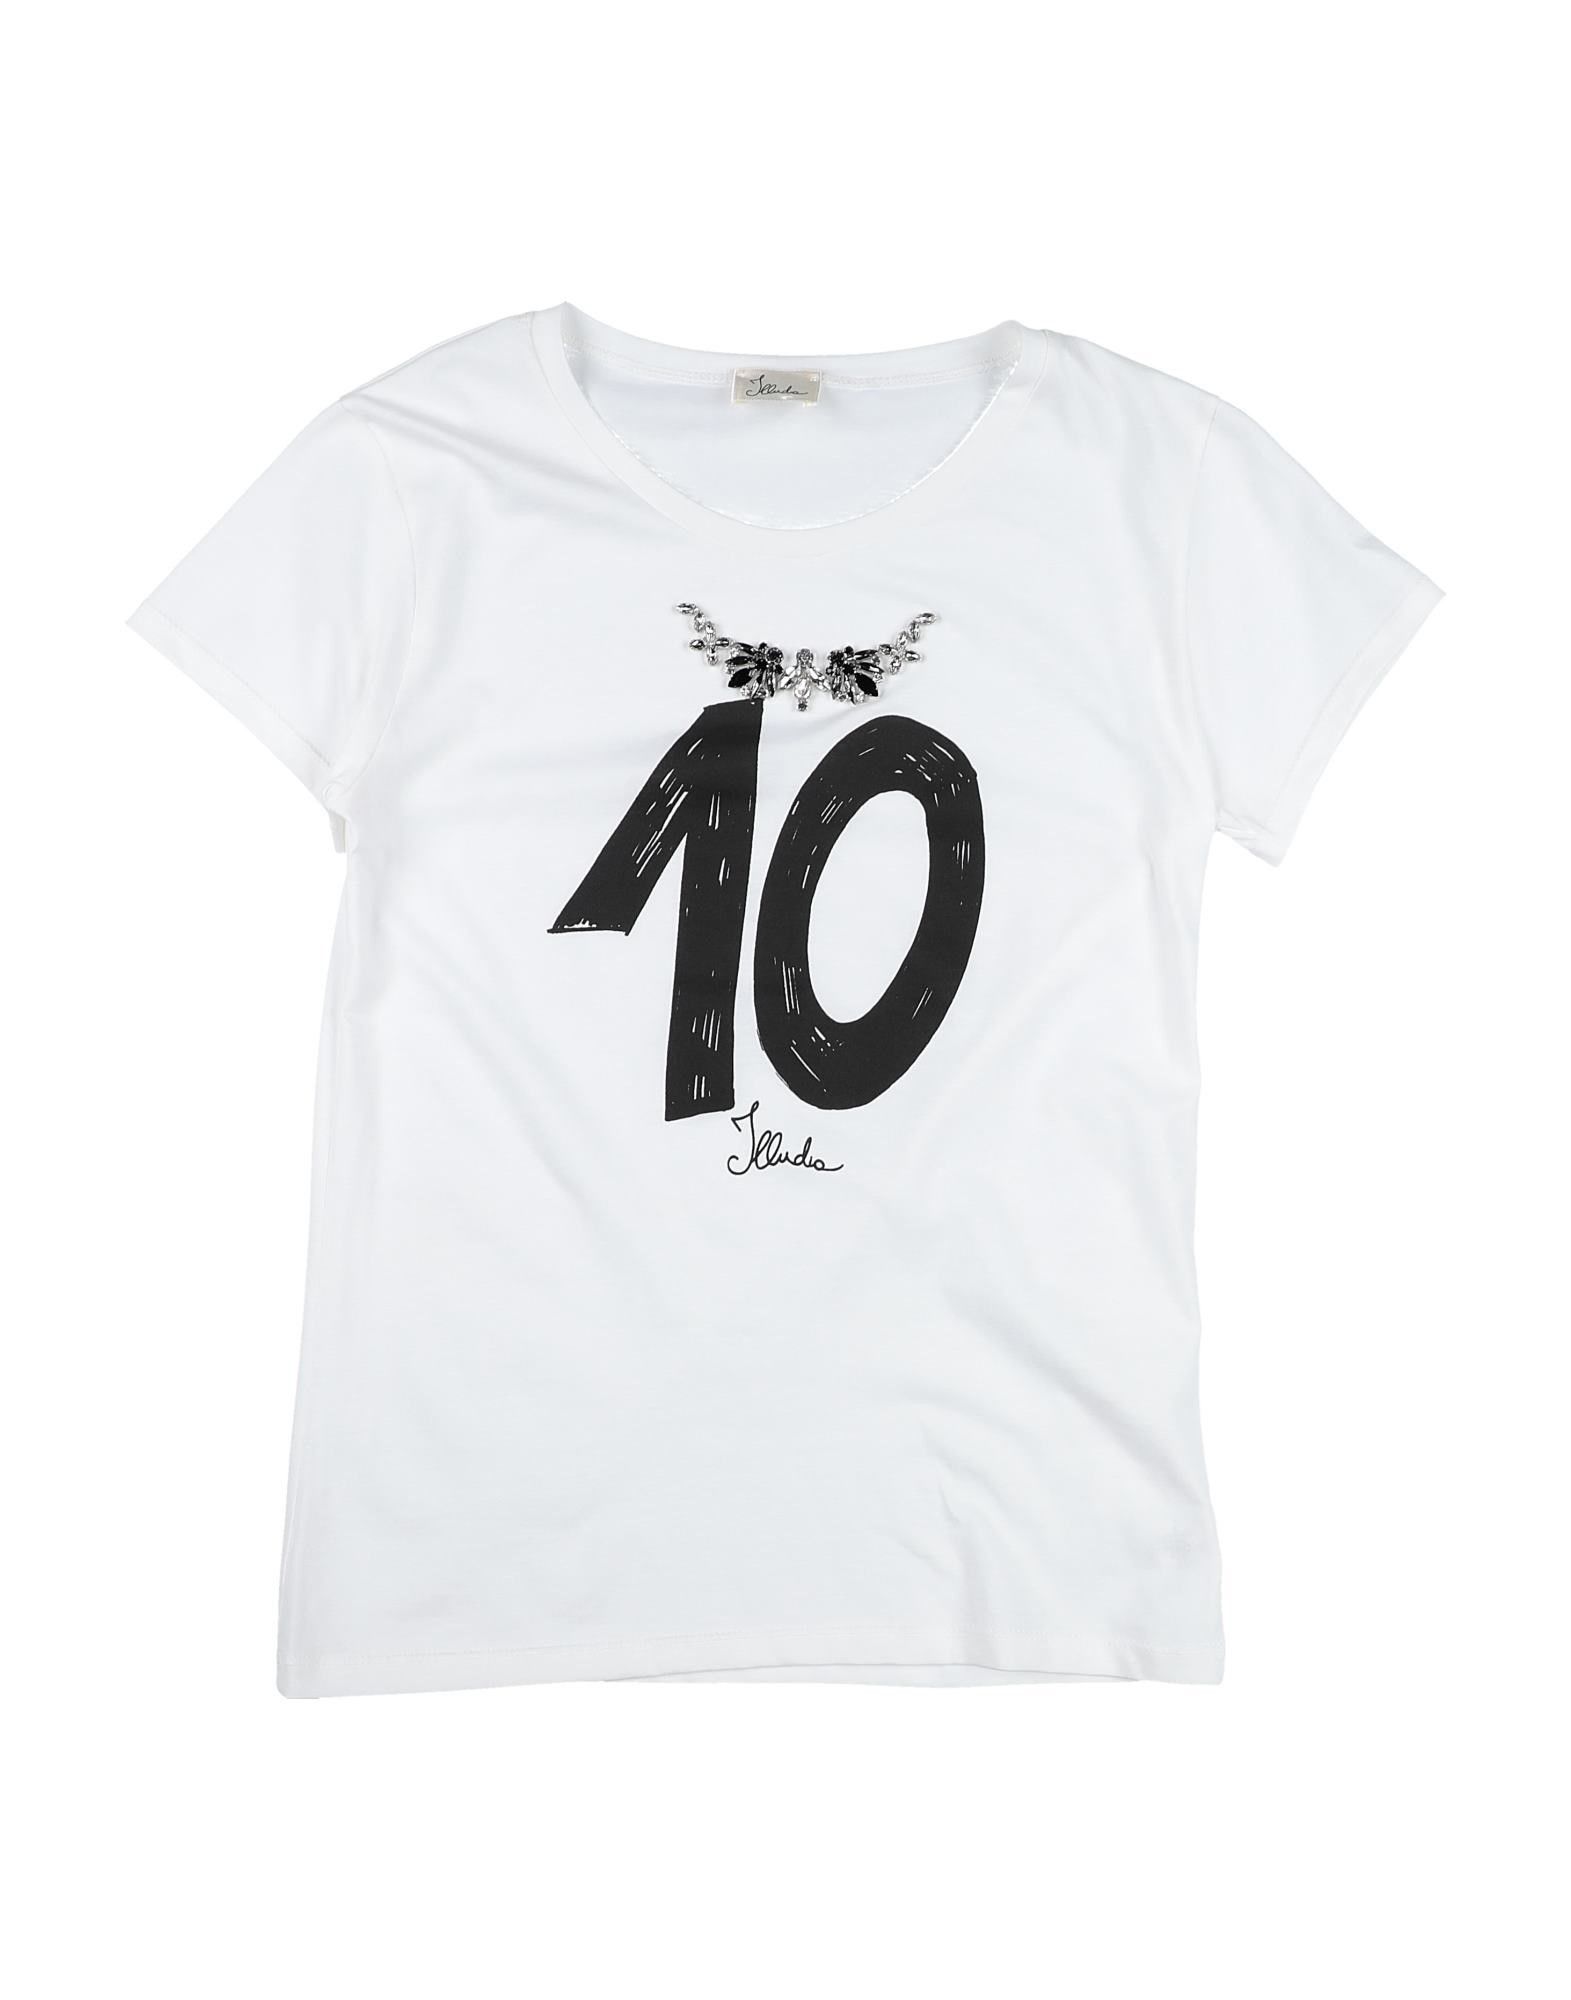 Illudia Kids' T-shirts In Ivory